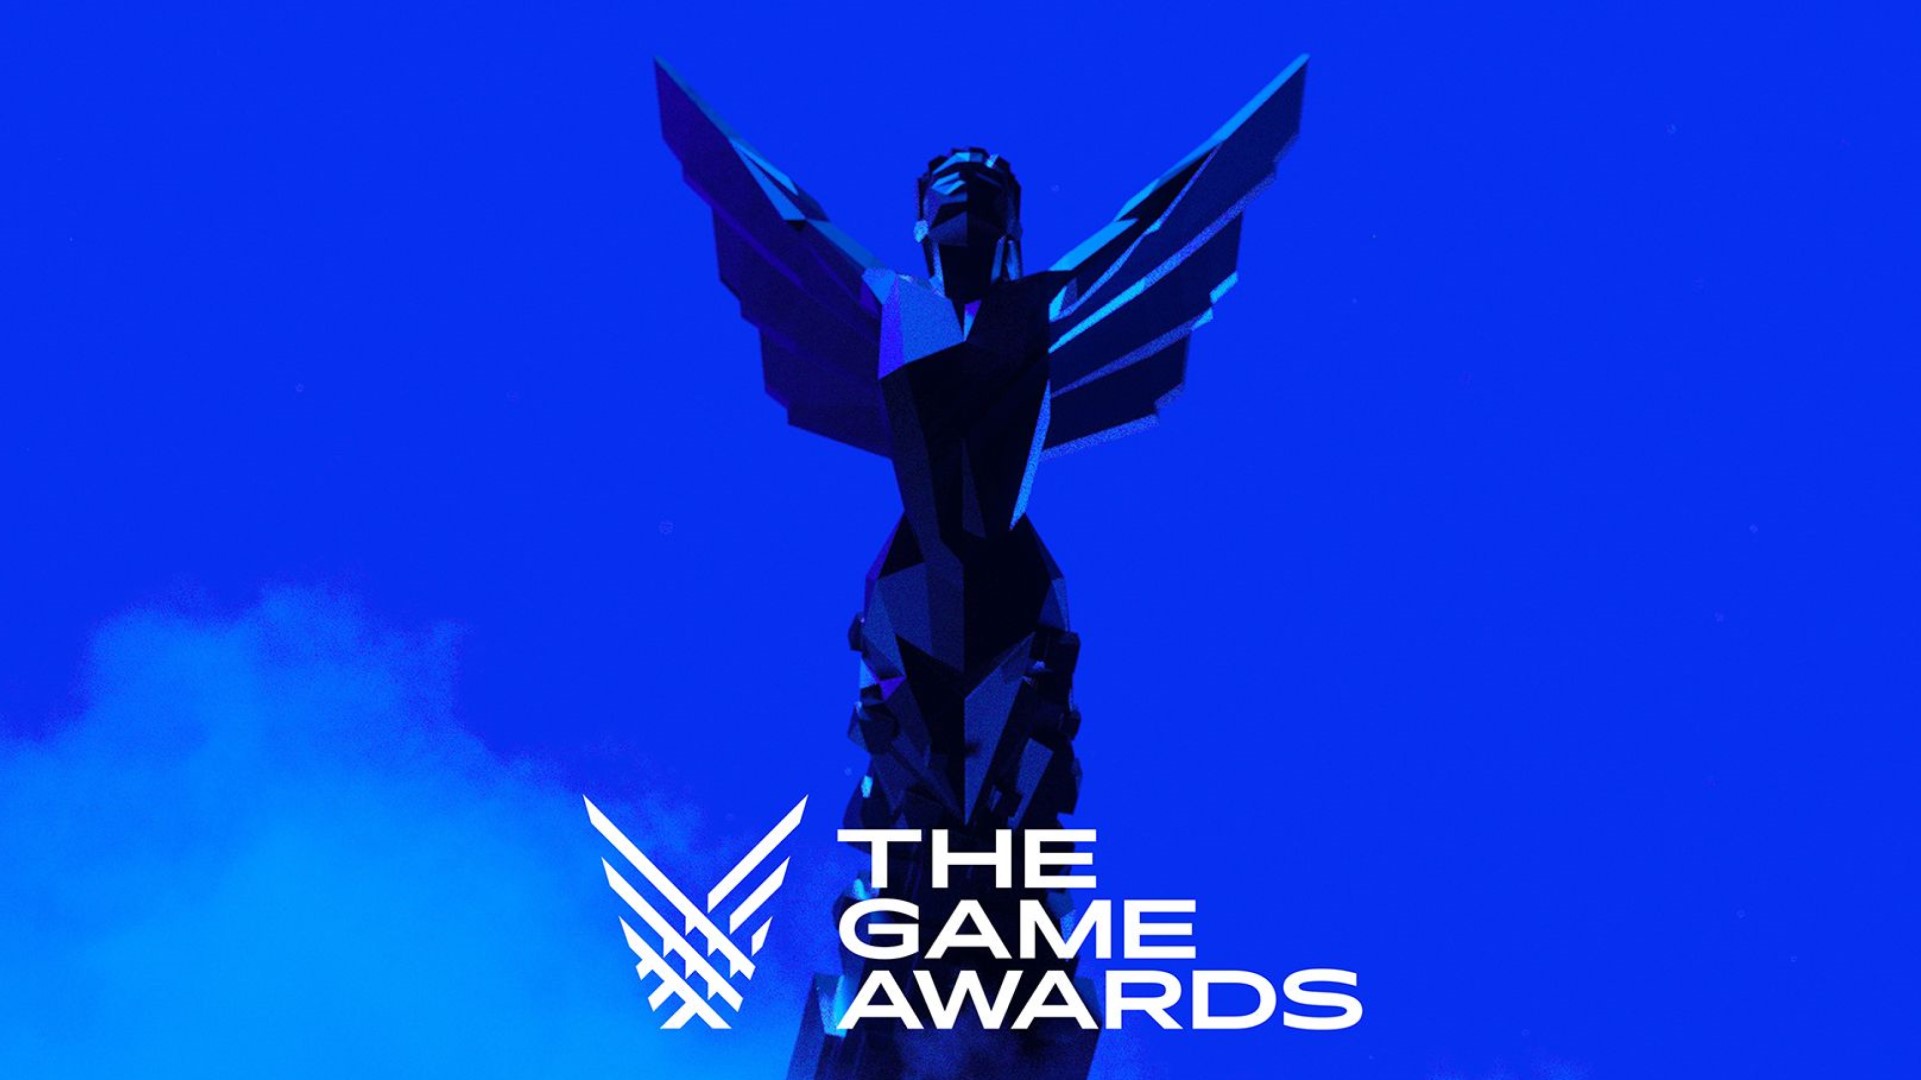 Our Picks For The 2021 Game Awards Better Win, Or We'll Pout